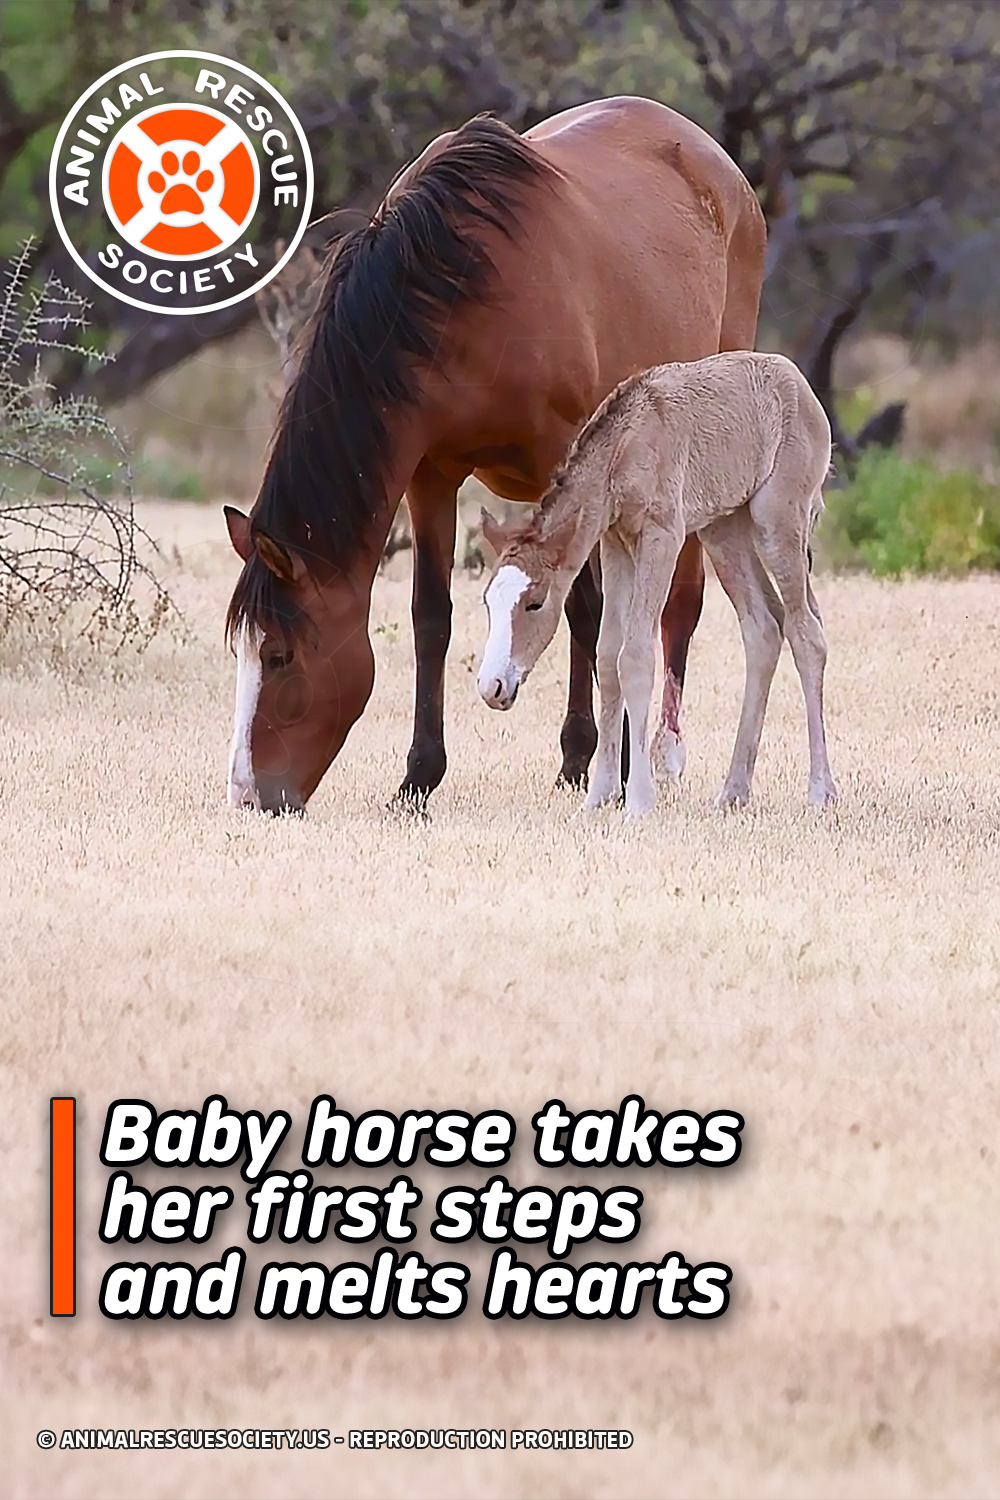 Baby horse takes her first steps and melts hearts